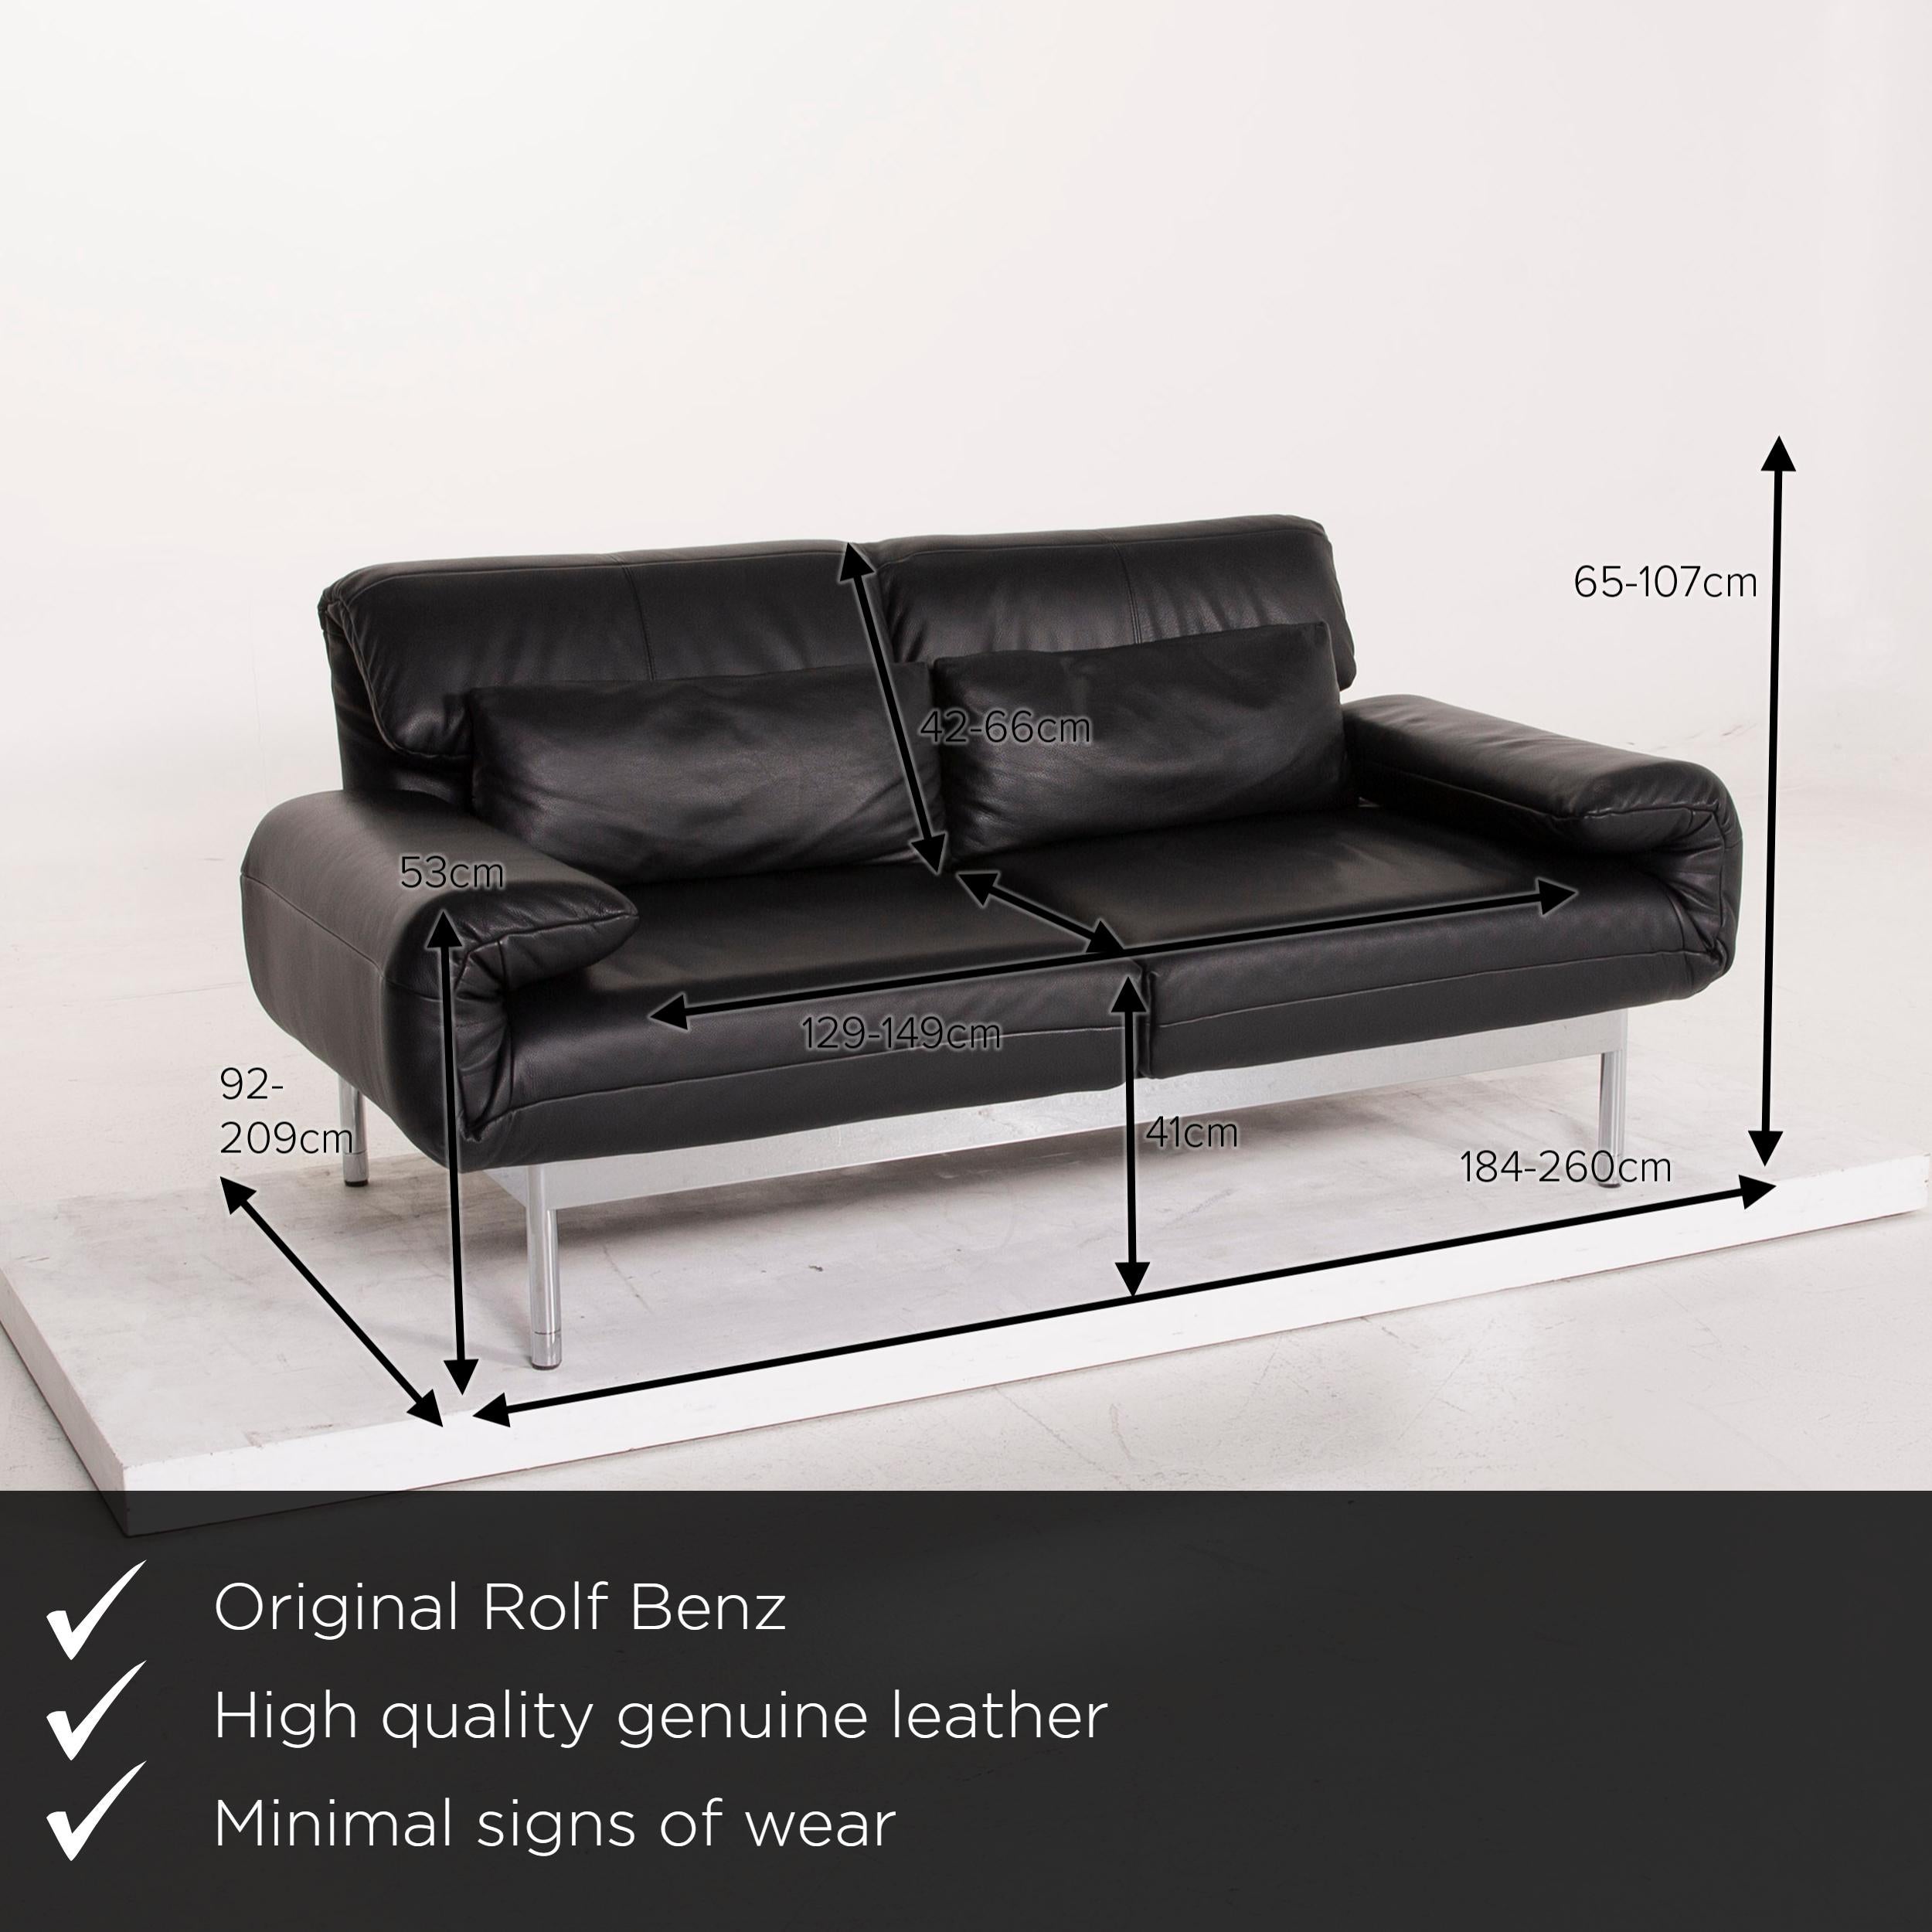 We present to you a Rolf Benz Plura leather sofa black two-seat function relax function couch.
   
Product measurements in centimeters:
 
Depth 92
Width 184
Height 65
Seat height 41
Rest height 53
Seat depth 70
Seat width 149
Back height